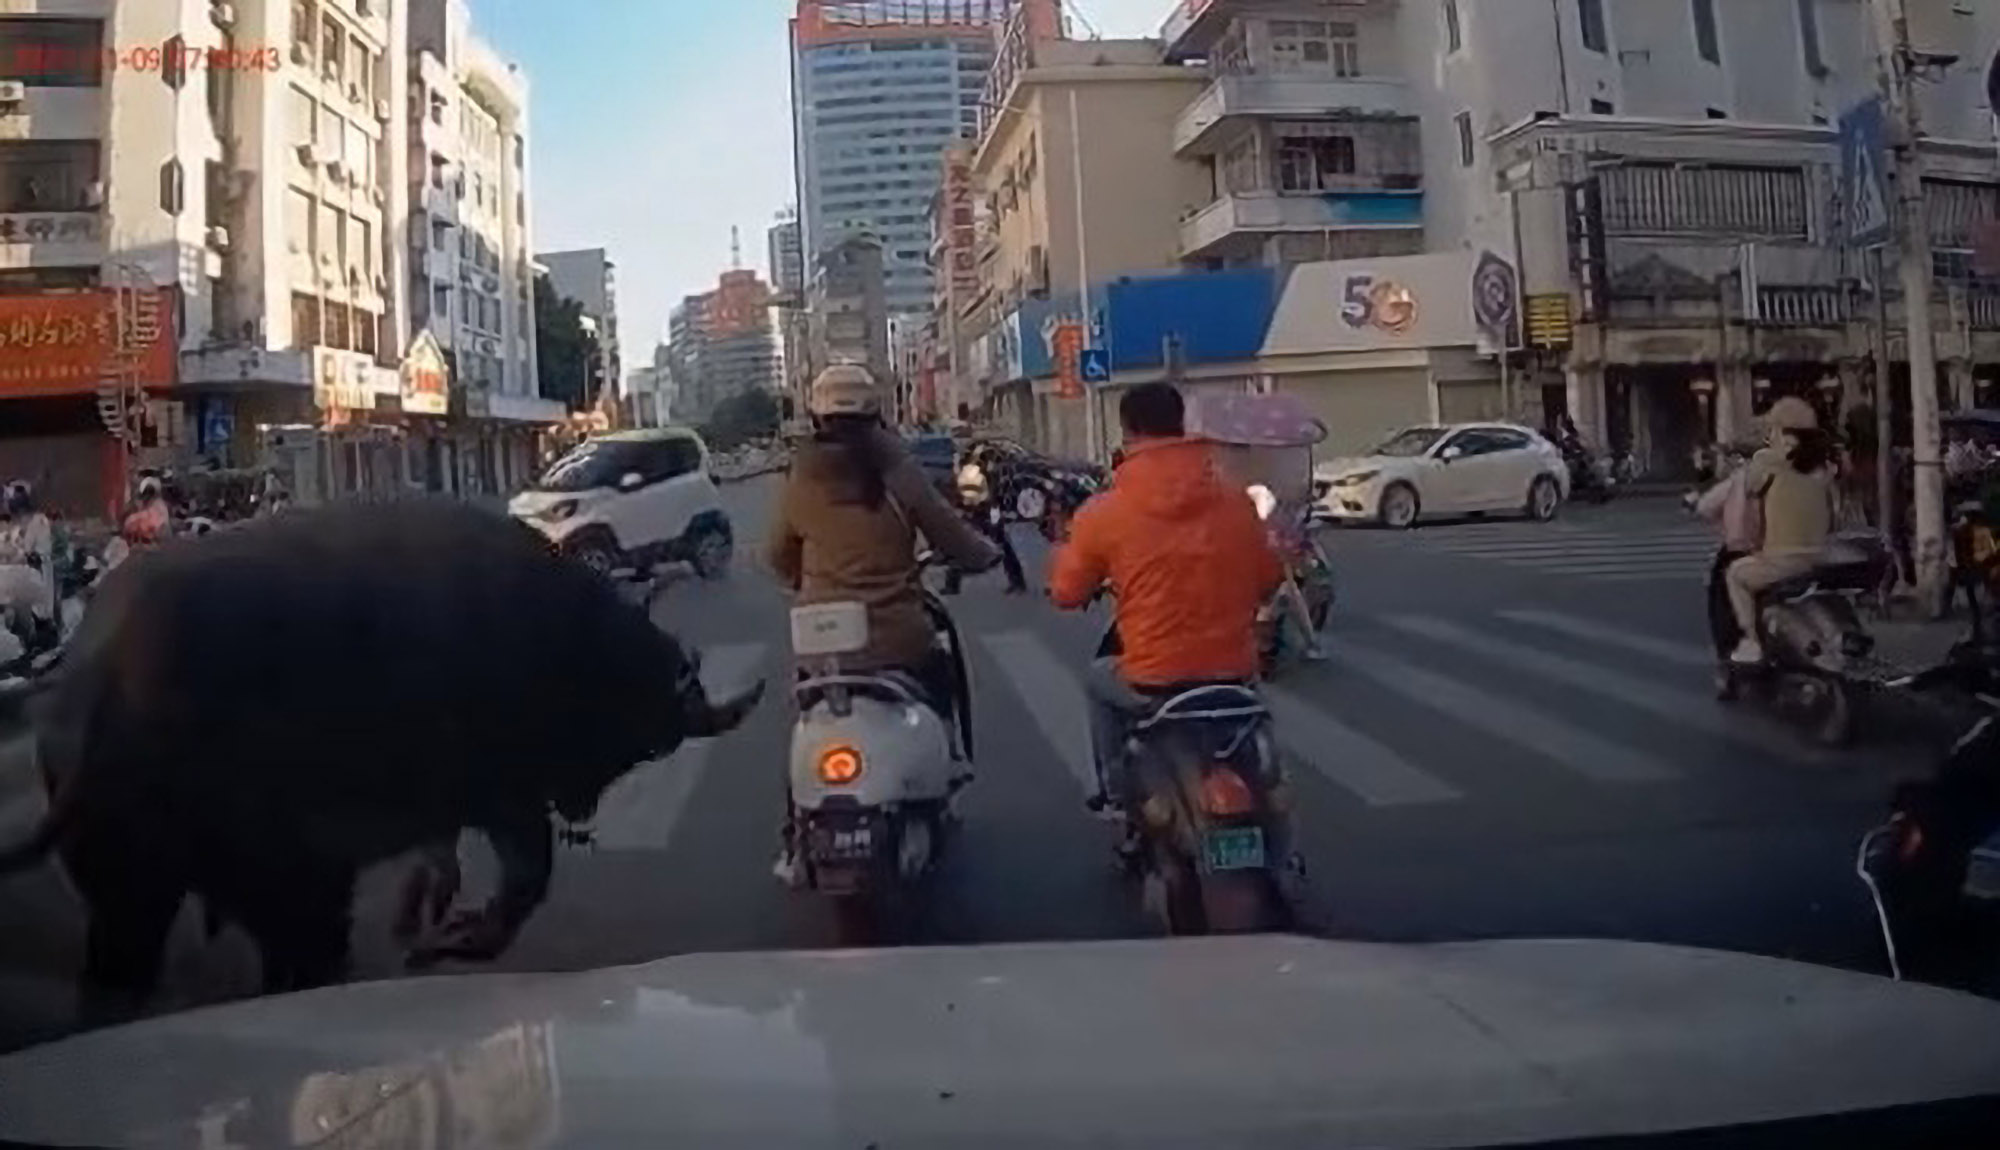 Read more about the article Rampaging Water Buffalo Knocks Woman Off Moped On Busy City Street Crossing